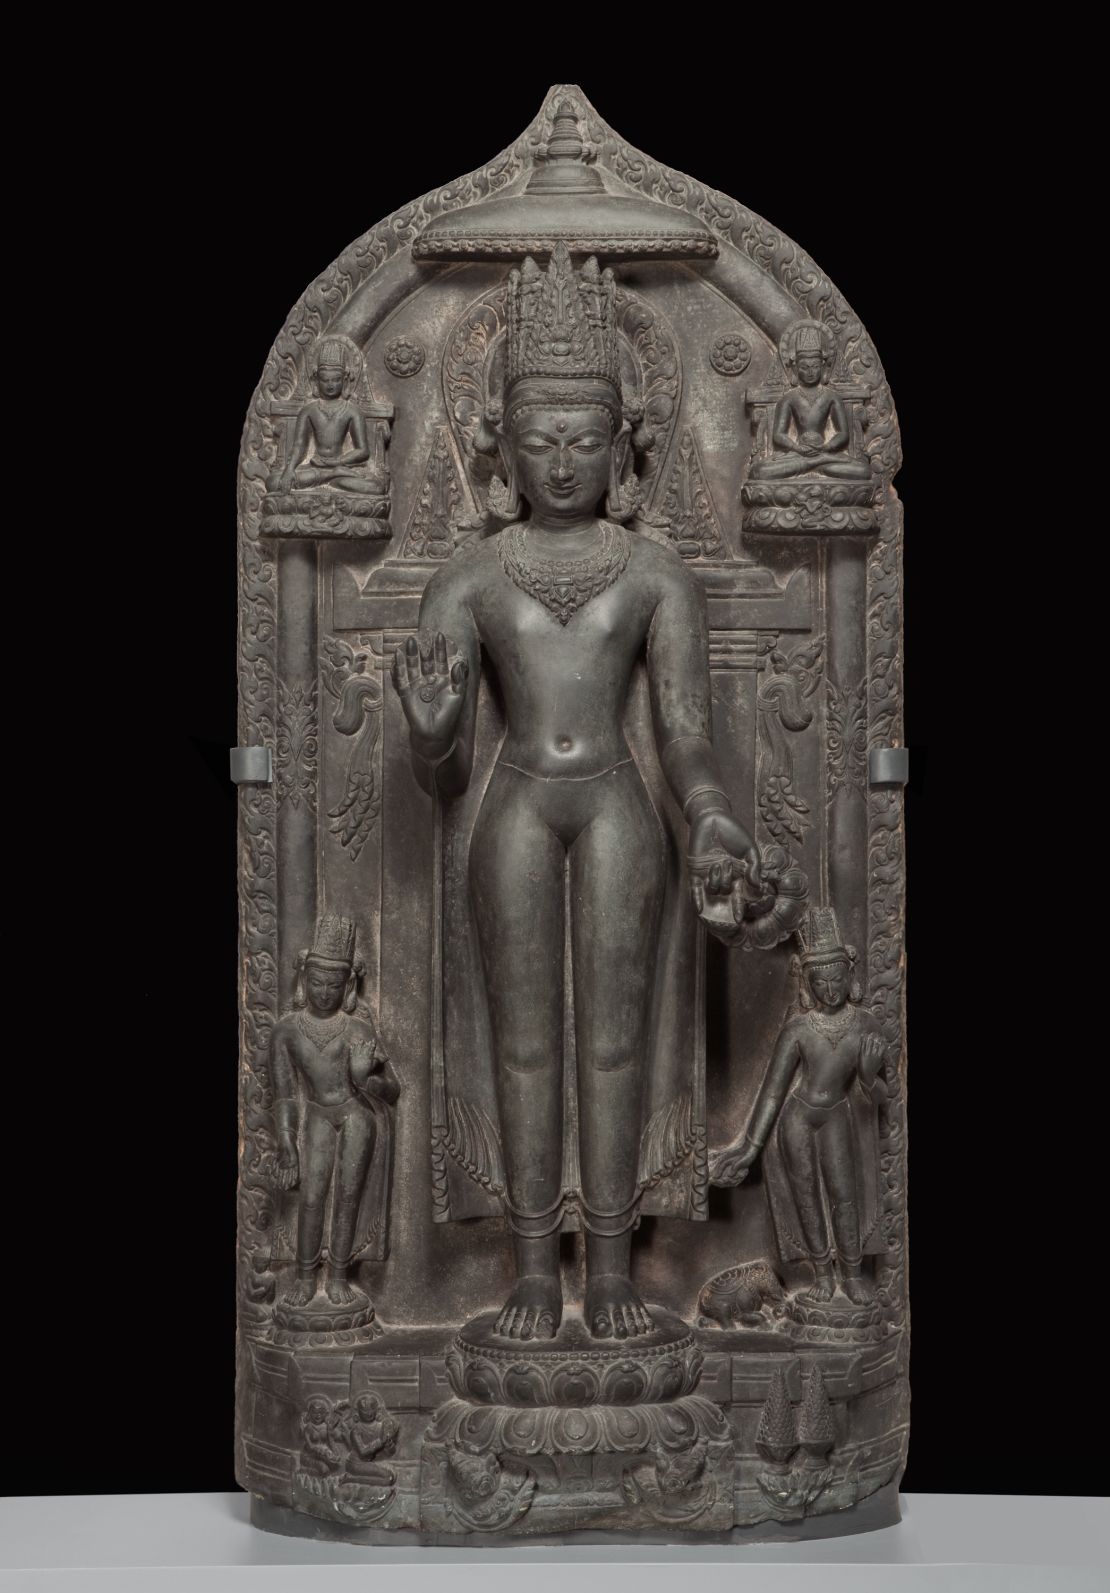 A basalt statue: "Standing crowned Buddha with four scenes of his life," approx. 1050--1100. southern Magadha region, Bihar state, India. Part of the Brundage Collection at the Asian Art Museum, San Francisco.